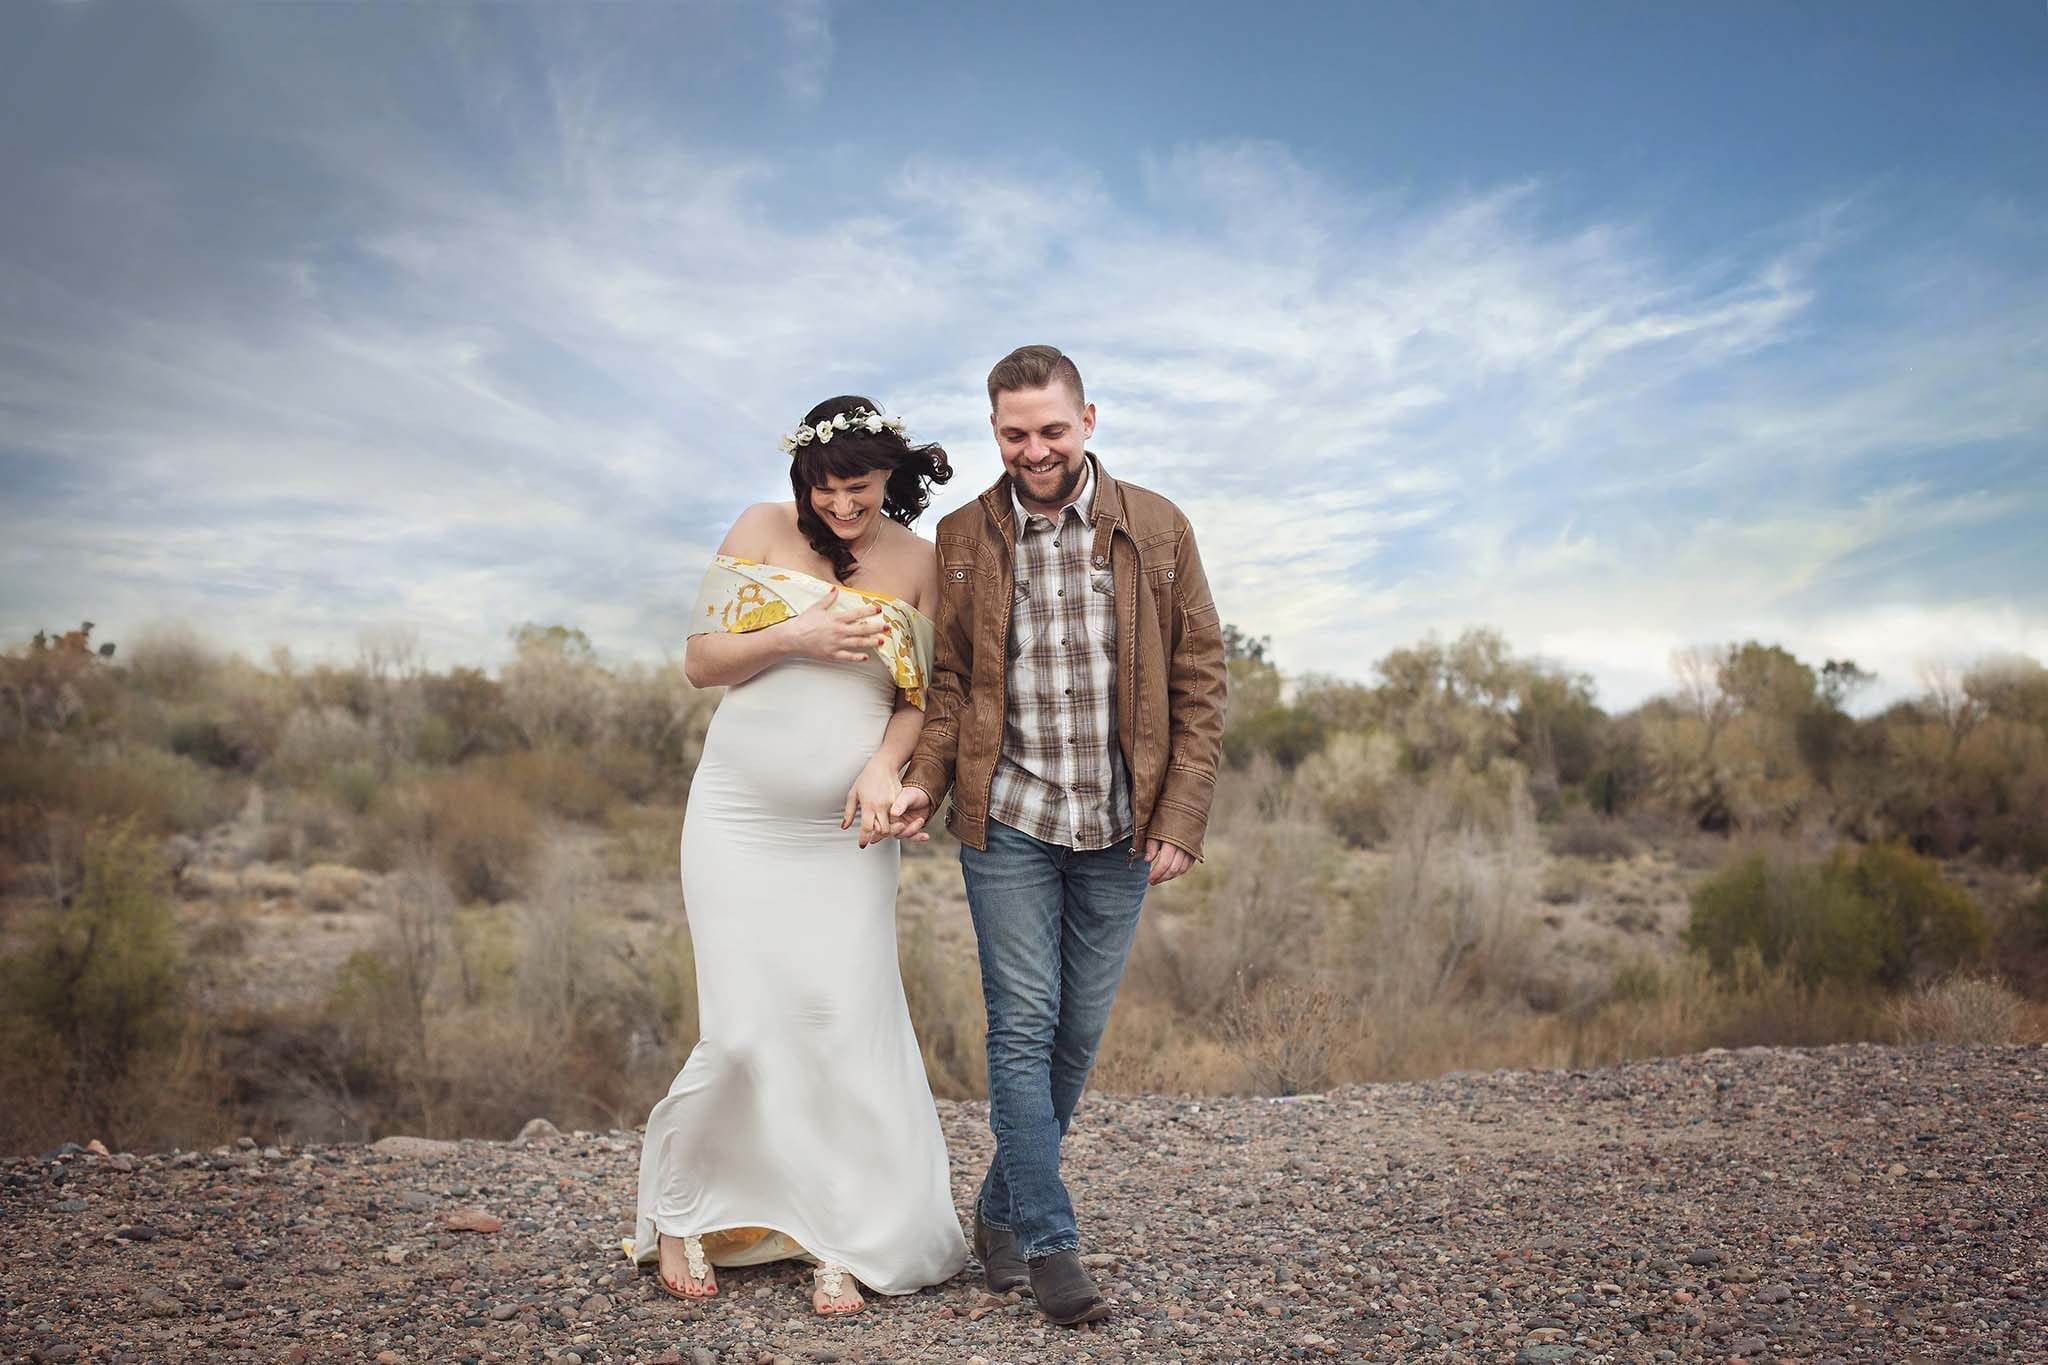 Candid maternity couples photo by best maternity photographer in Arizona.